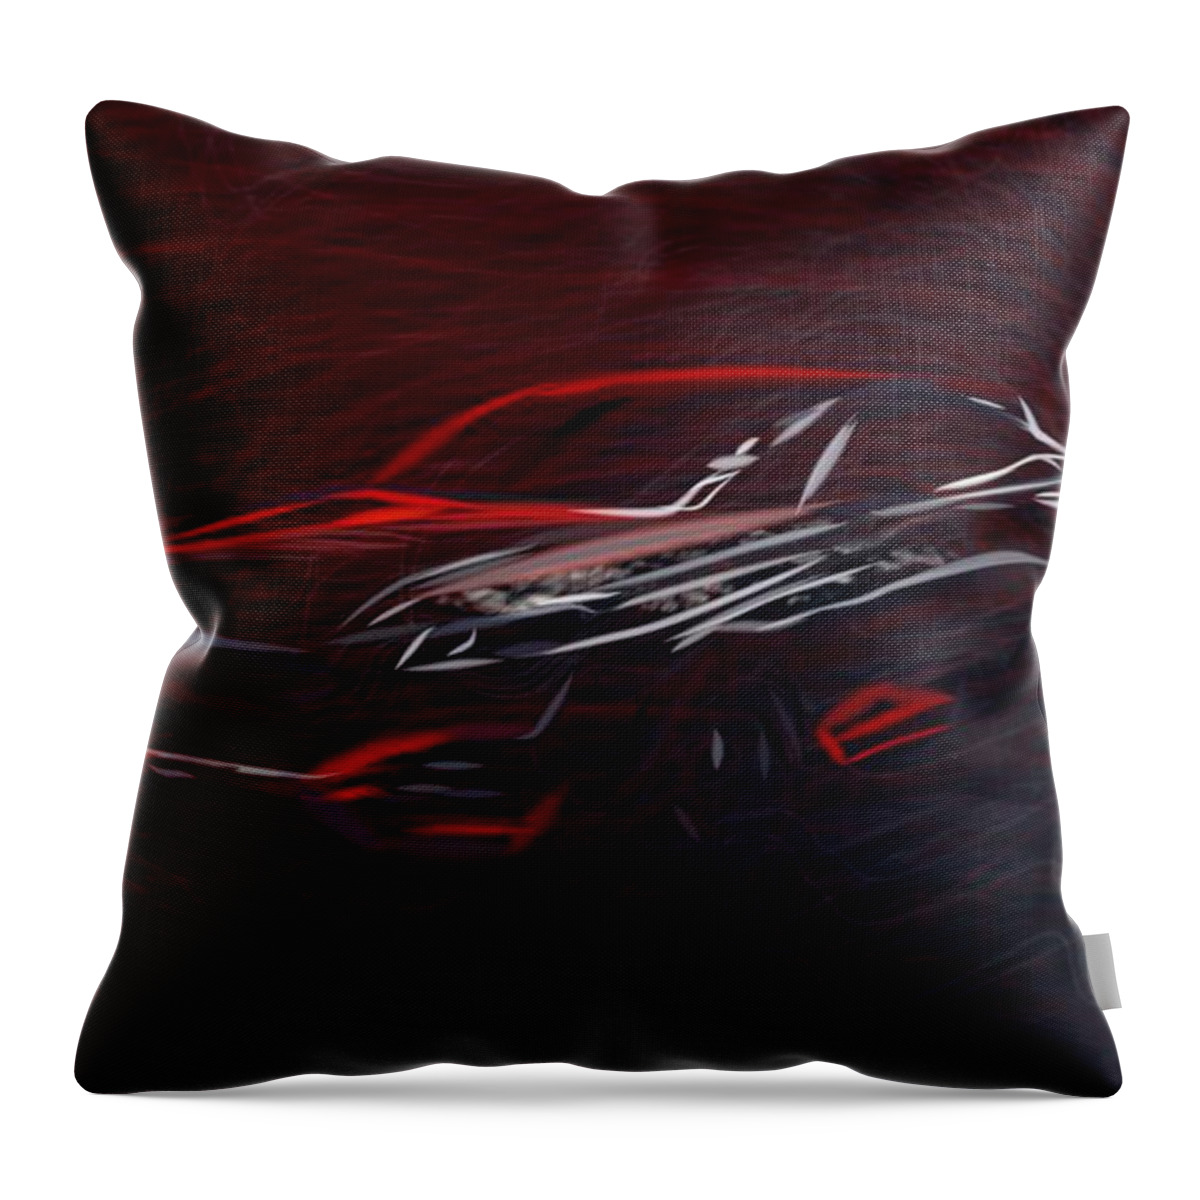 Peugeot Throw Pillow featuring the digital art Peugeot Quartz Drawing by CarsToon Concept